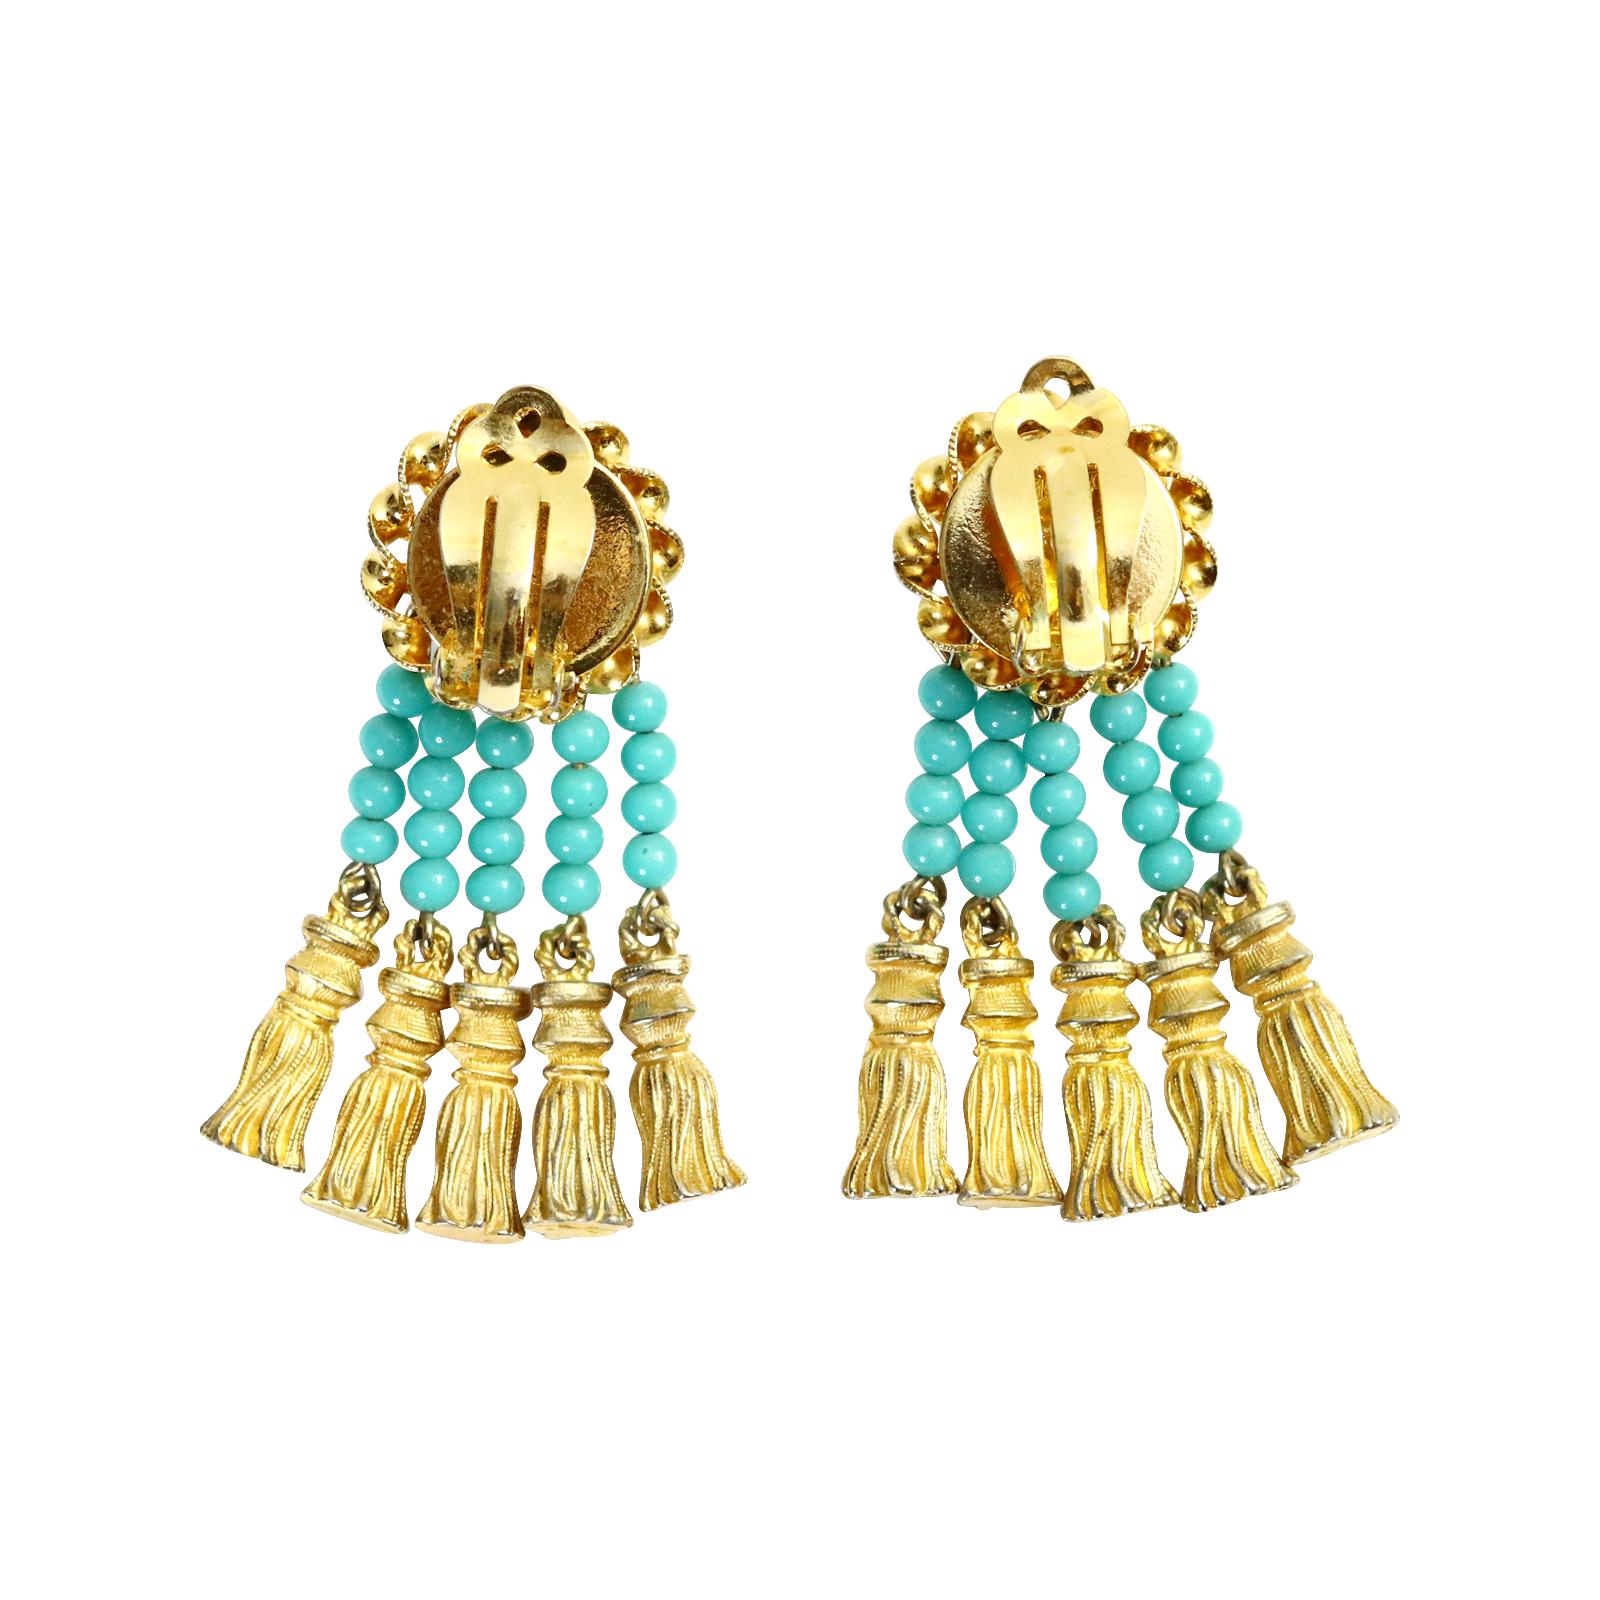 Vintage deLillo Faux Turquoise and Gold Tone Dangling Earrings Circa 1970s In Good Condition For Sale In New York, NY